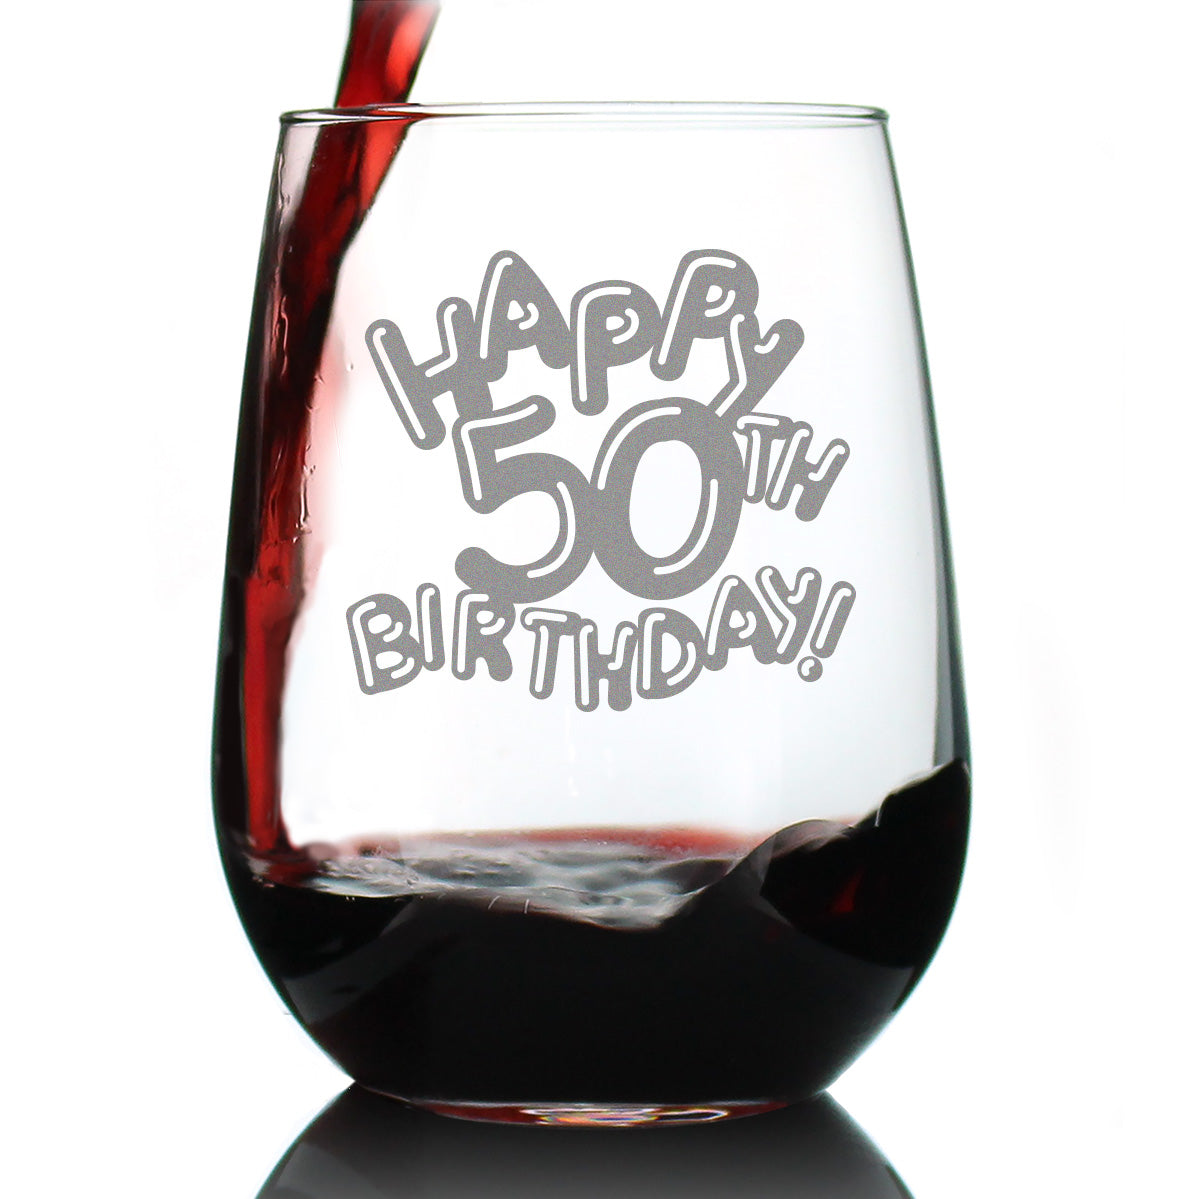 Happy 50th Birthday Balloons - Stemless Wine Glass Gifts for Women &amp; Men Turning 50 - Bday Party Decor - Large Glasses 17 Oz